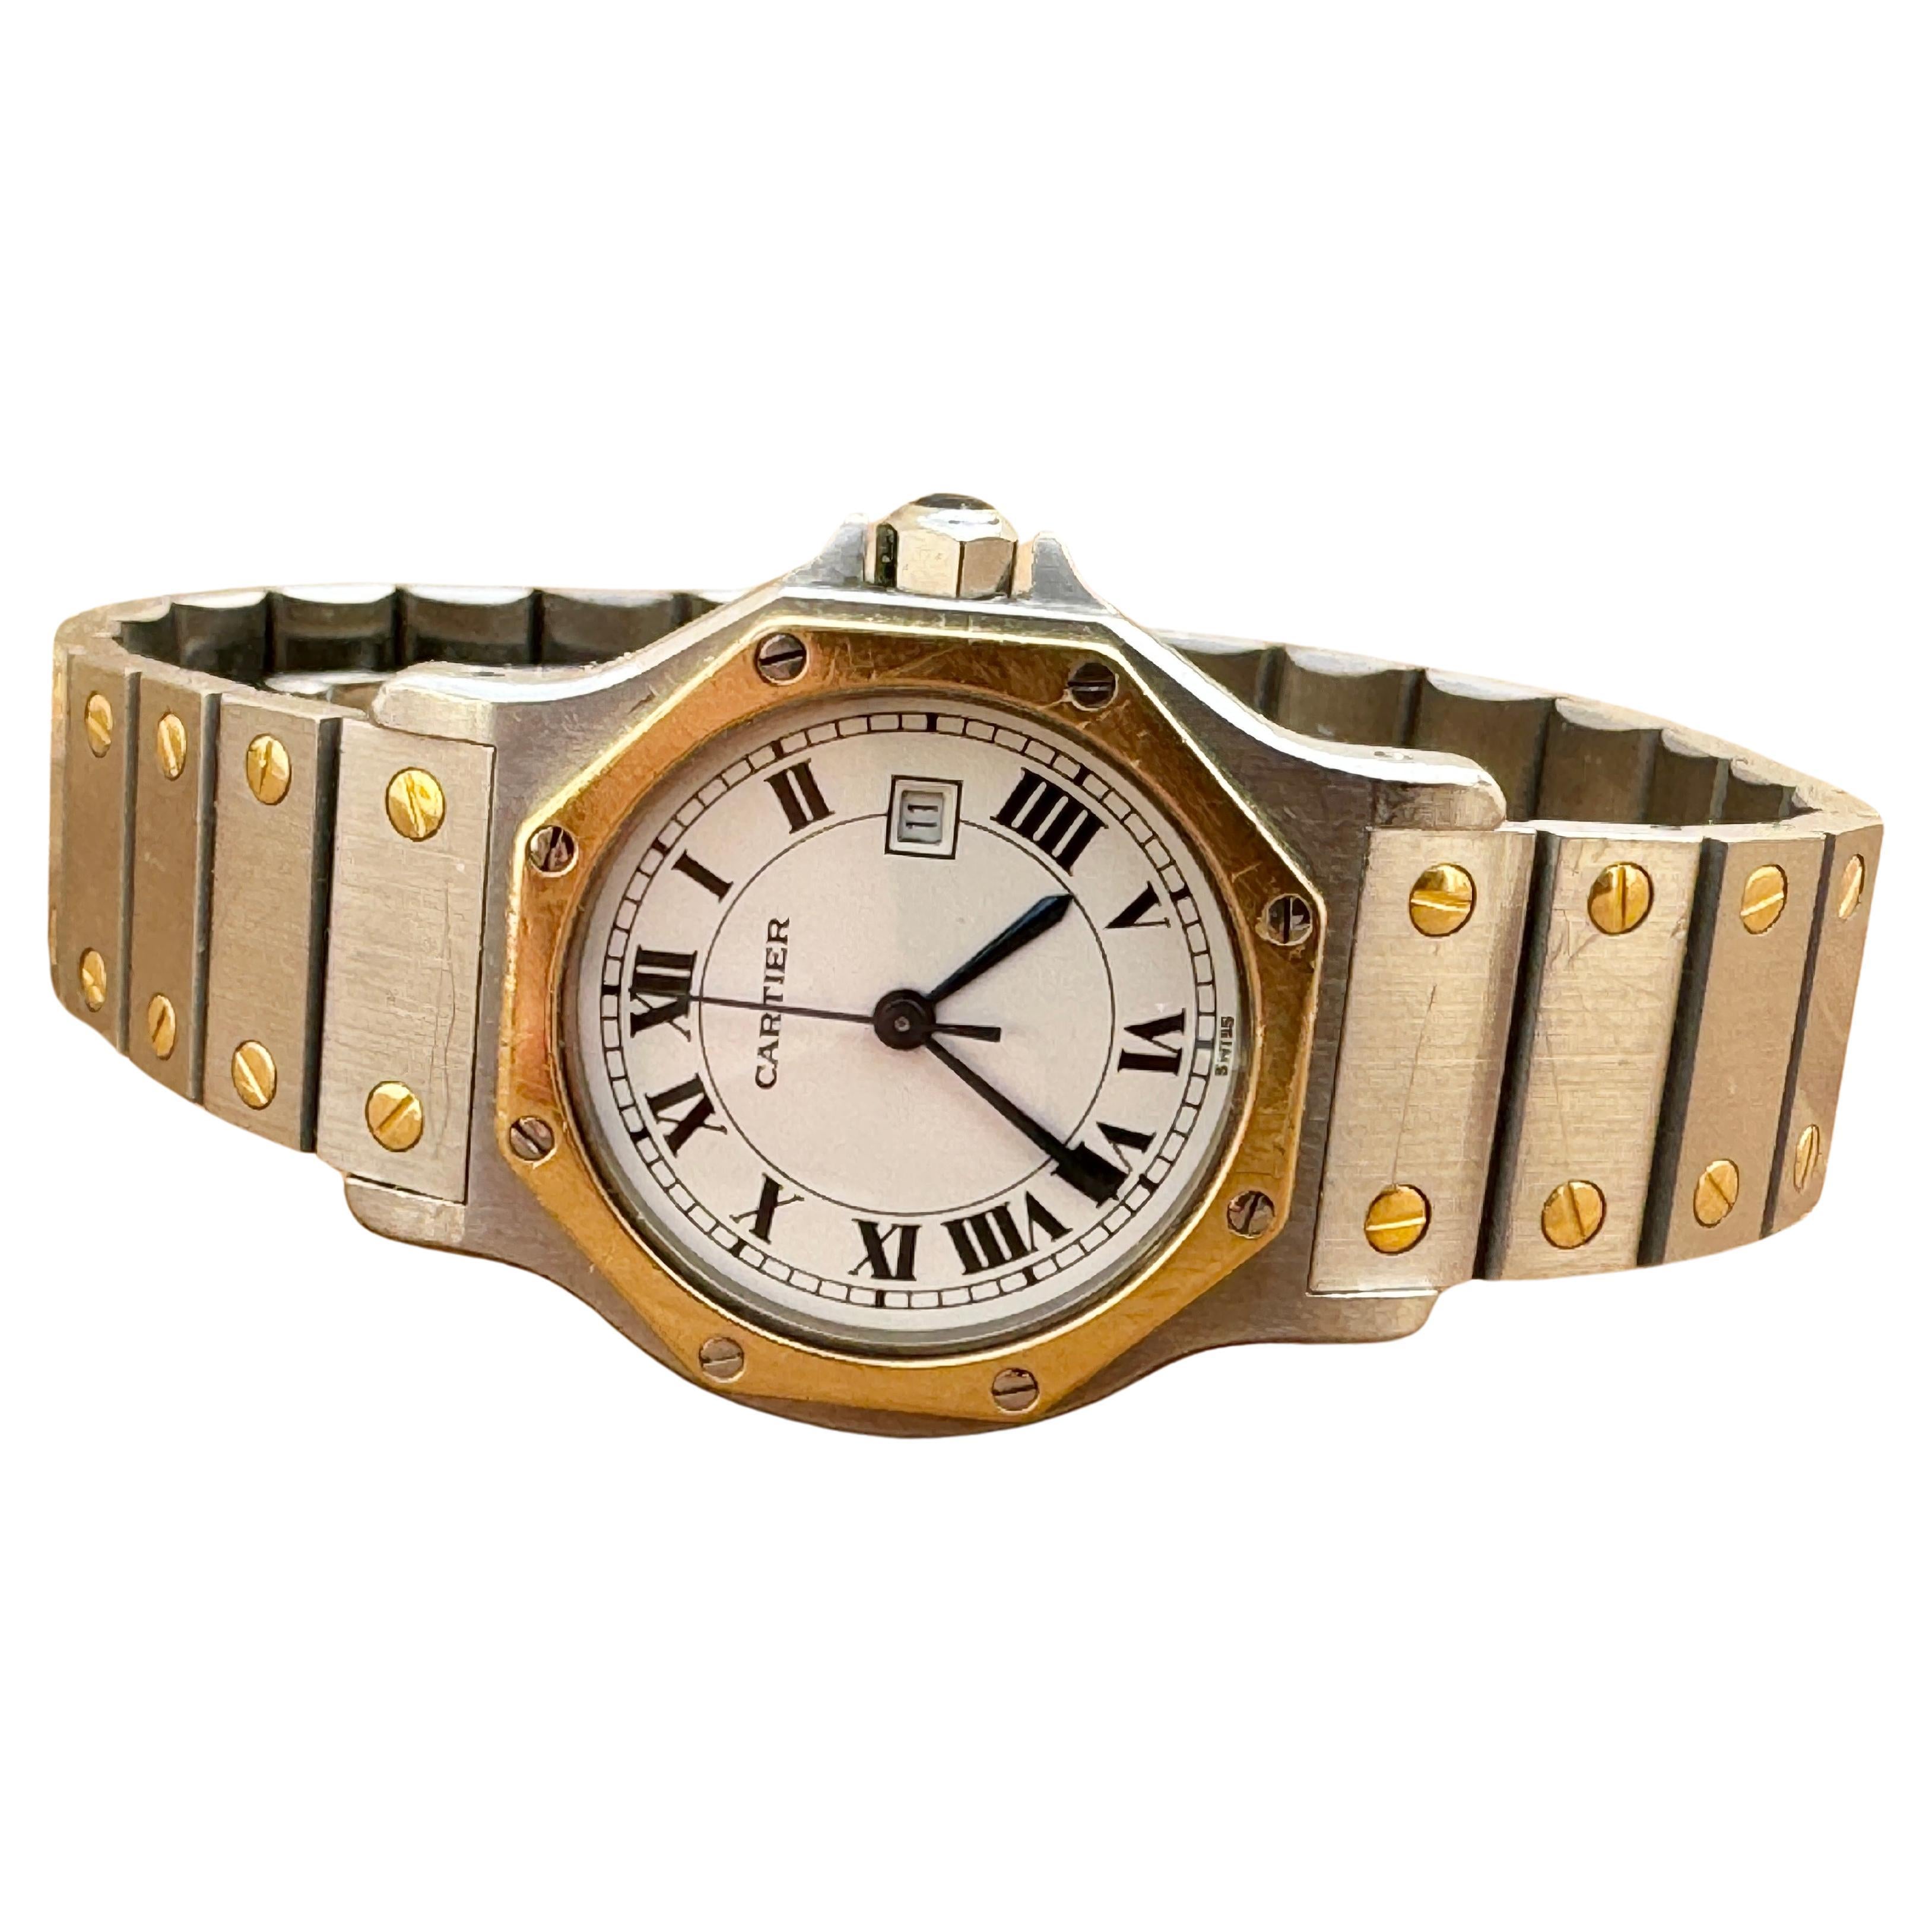 Cartier Santos Octagon 29662 Gold/Steel Watch Boxed For Sale